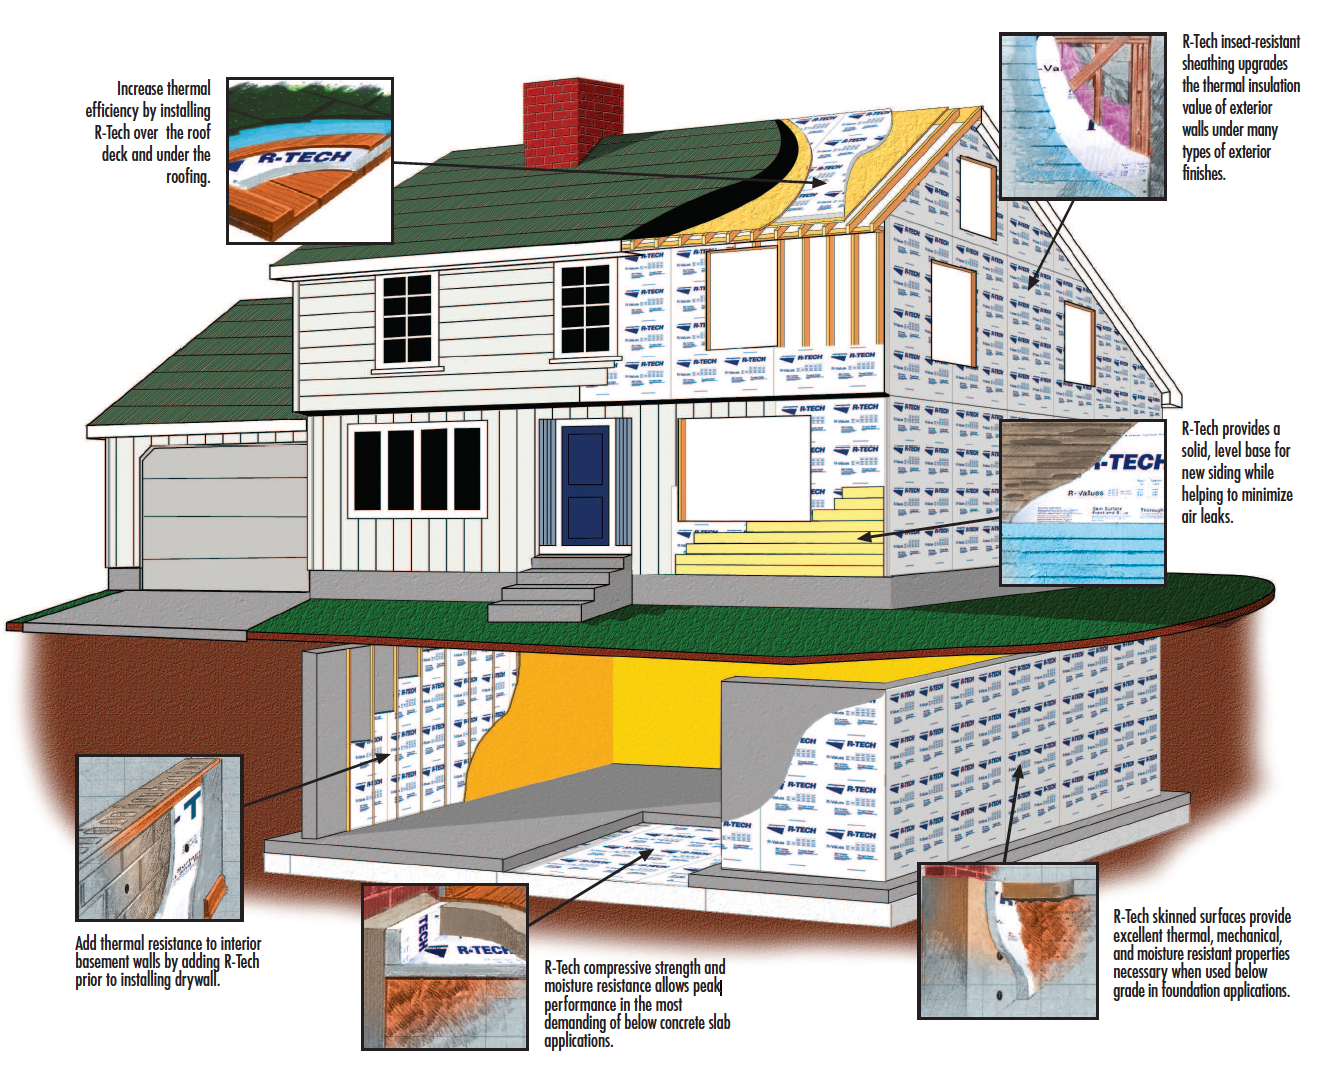 energy-efficient shed windows and insulation